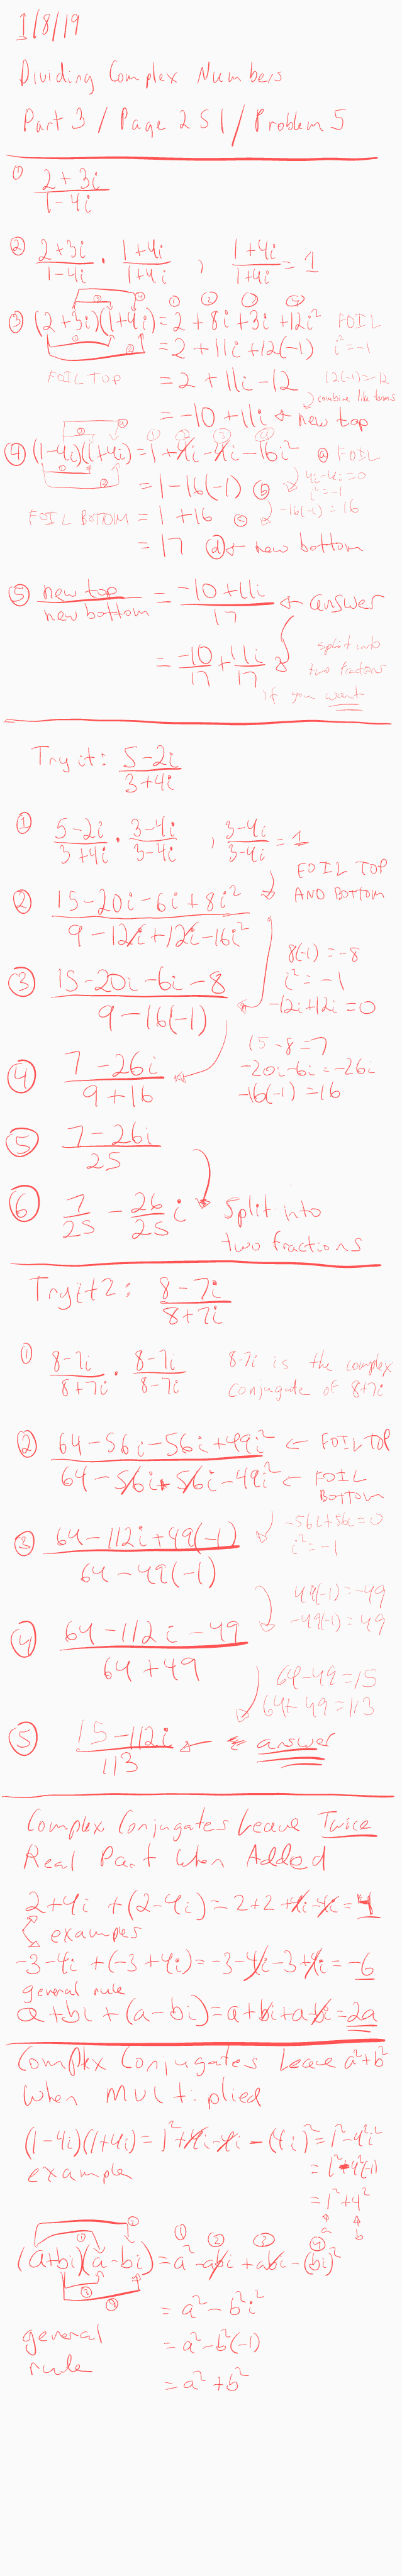 dividing complex numbers of the form (a+bi) over (c+di)